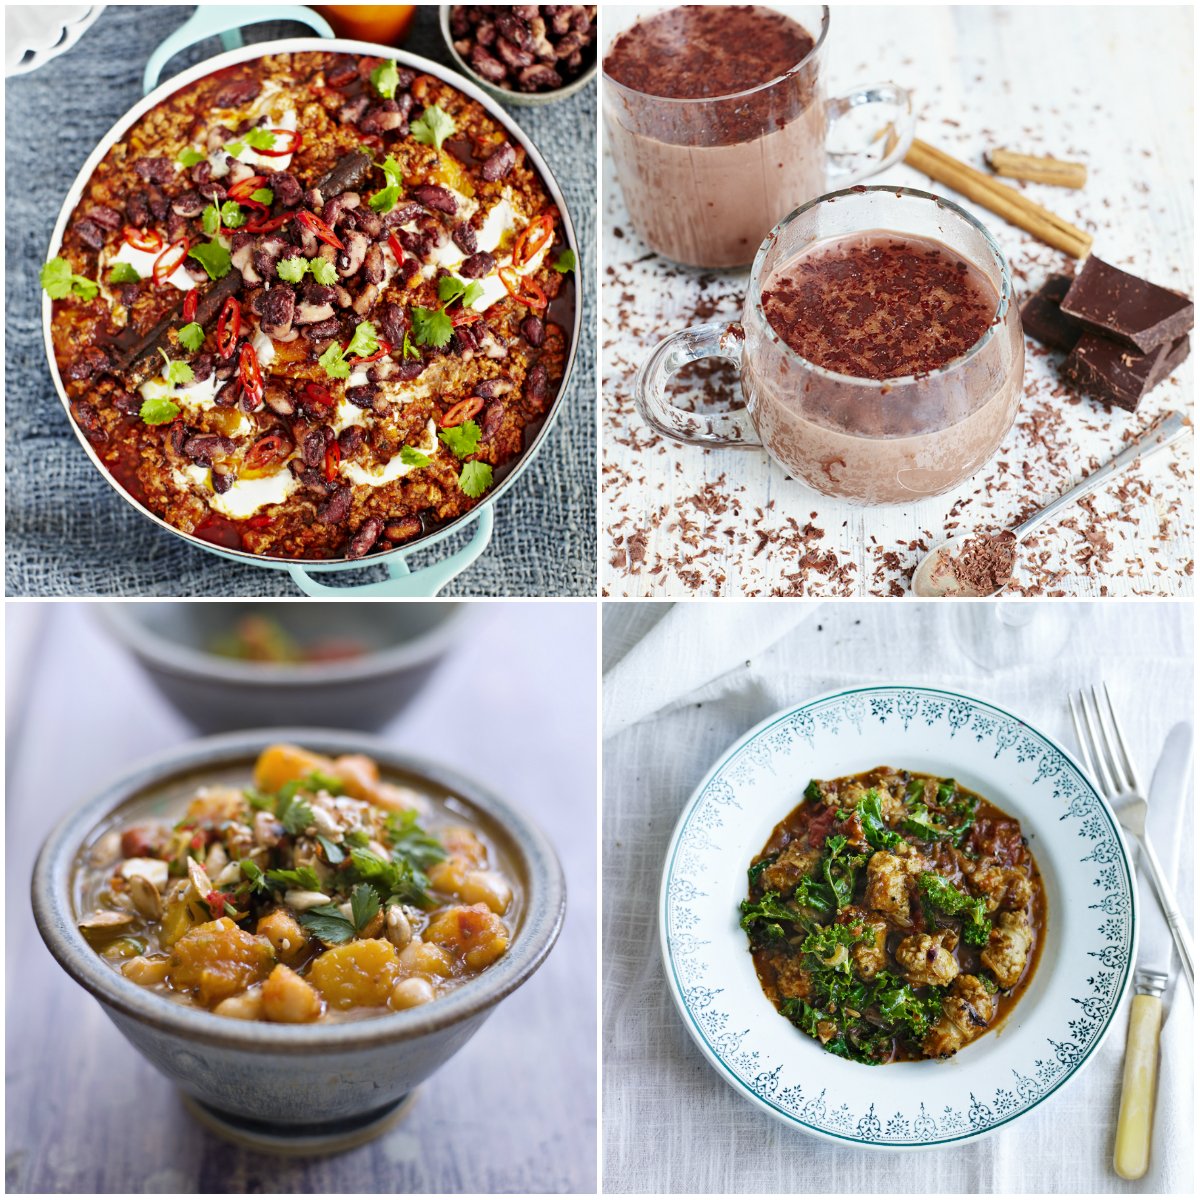 Keep warm this week with our pick of the best recipes for Bonfire Night! ???? https://t.co/BLwdsq1CQA https://t.co/Xk8VAY738r